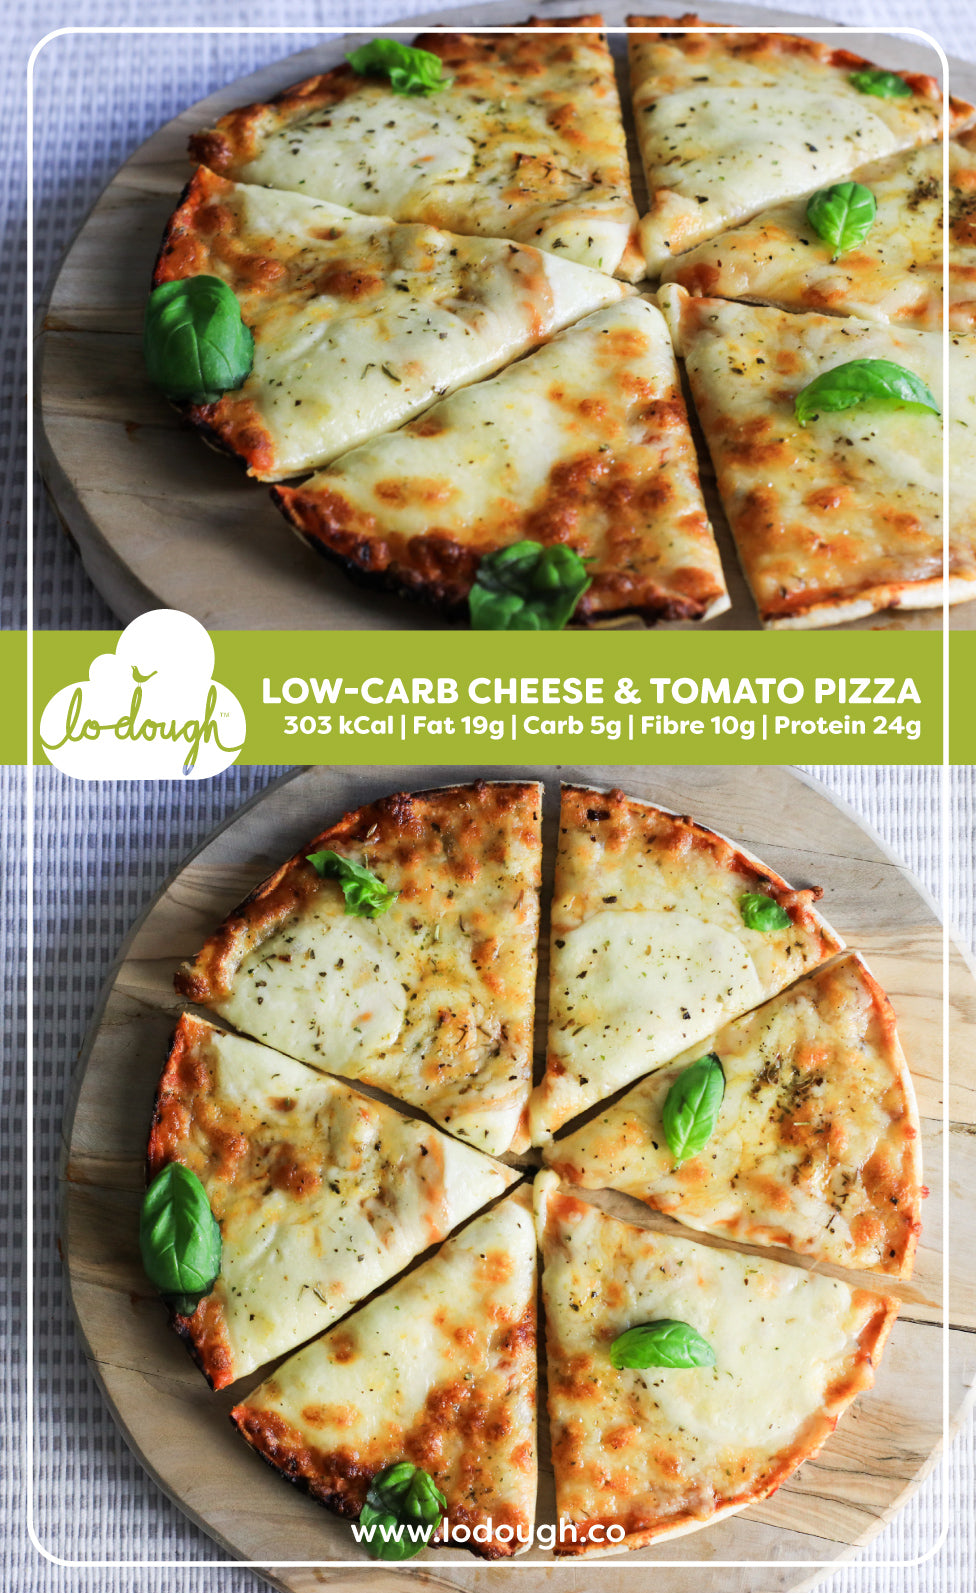 Low-Carb Cheese & Tomato Pizza